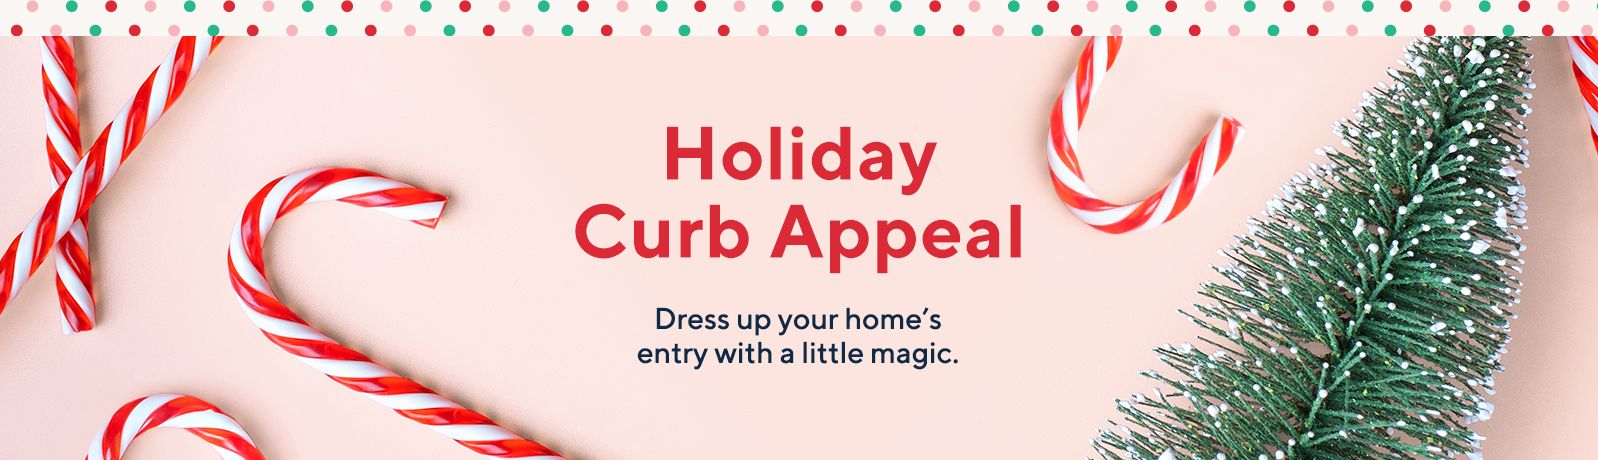 Holiday Curb Appeal  - Dress up your home's entry with a little magic.